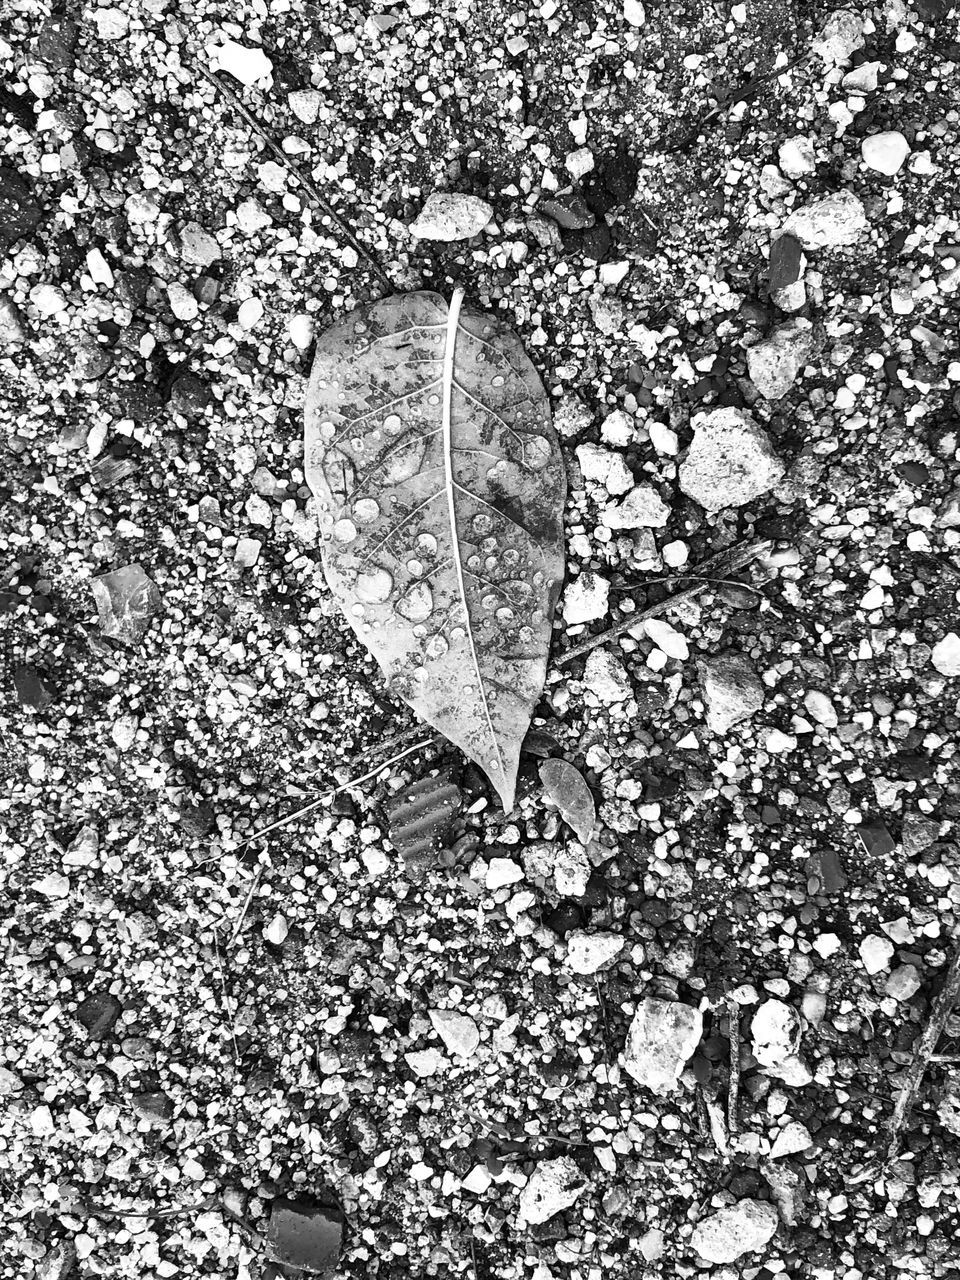 black and white, monochrome photography, leaf, plant part, no people, monochrome, day, nature, textured, heart shape, outdoors, high angle view, pattern, close-up, backgrounds, full frame